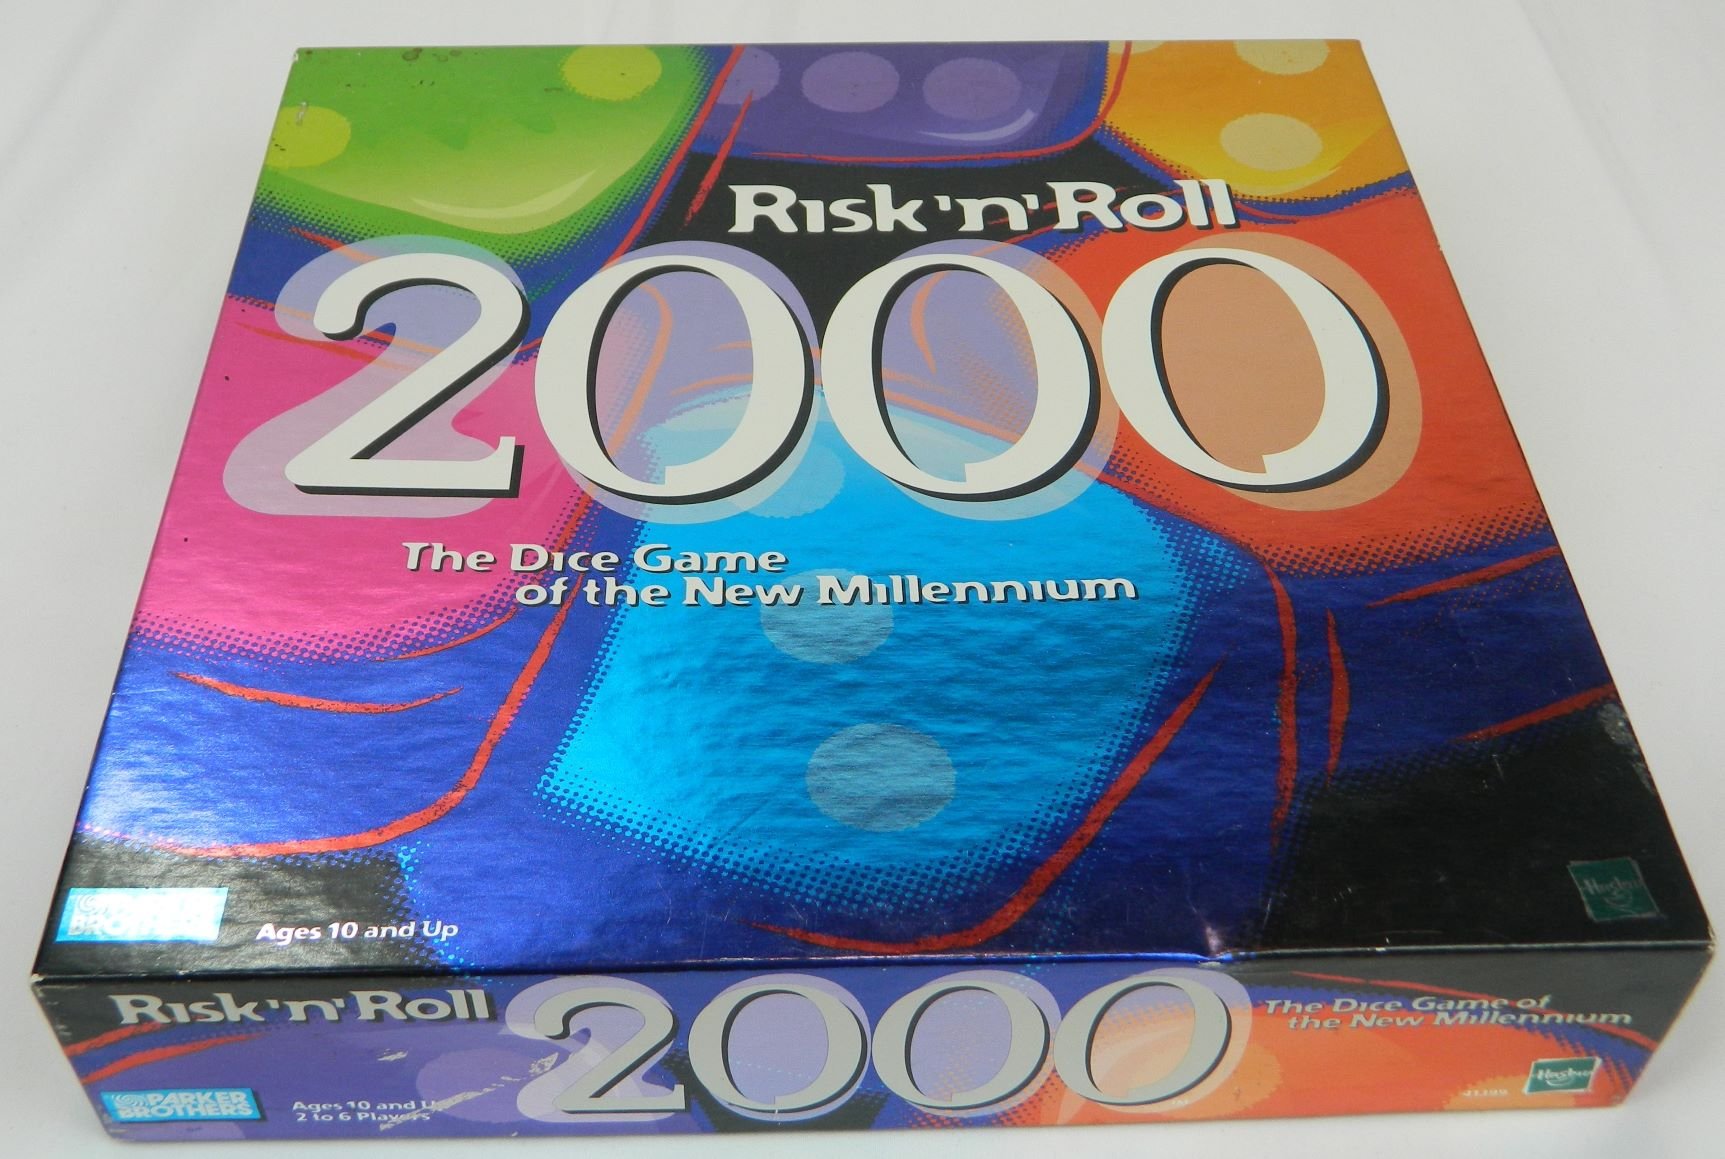 Box for Risk 'n' Roll 2000